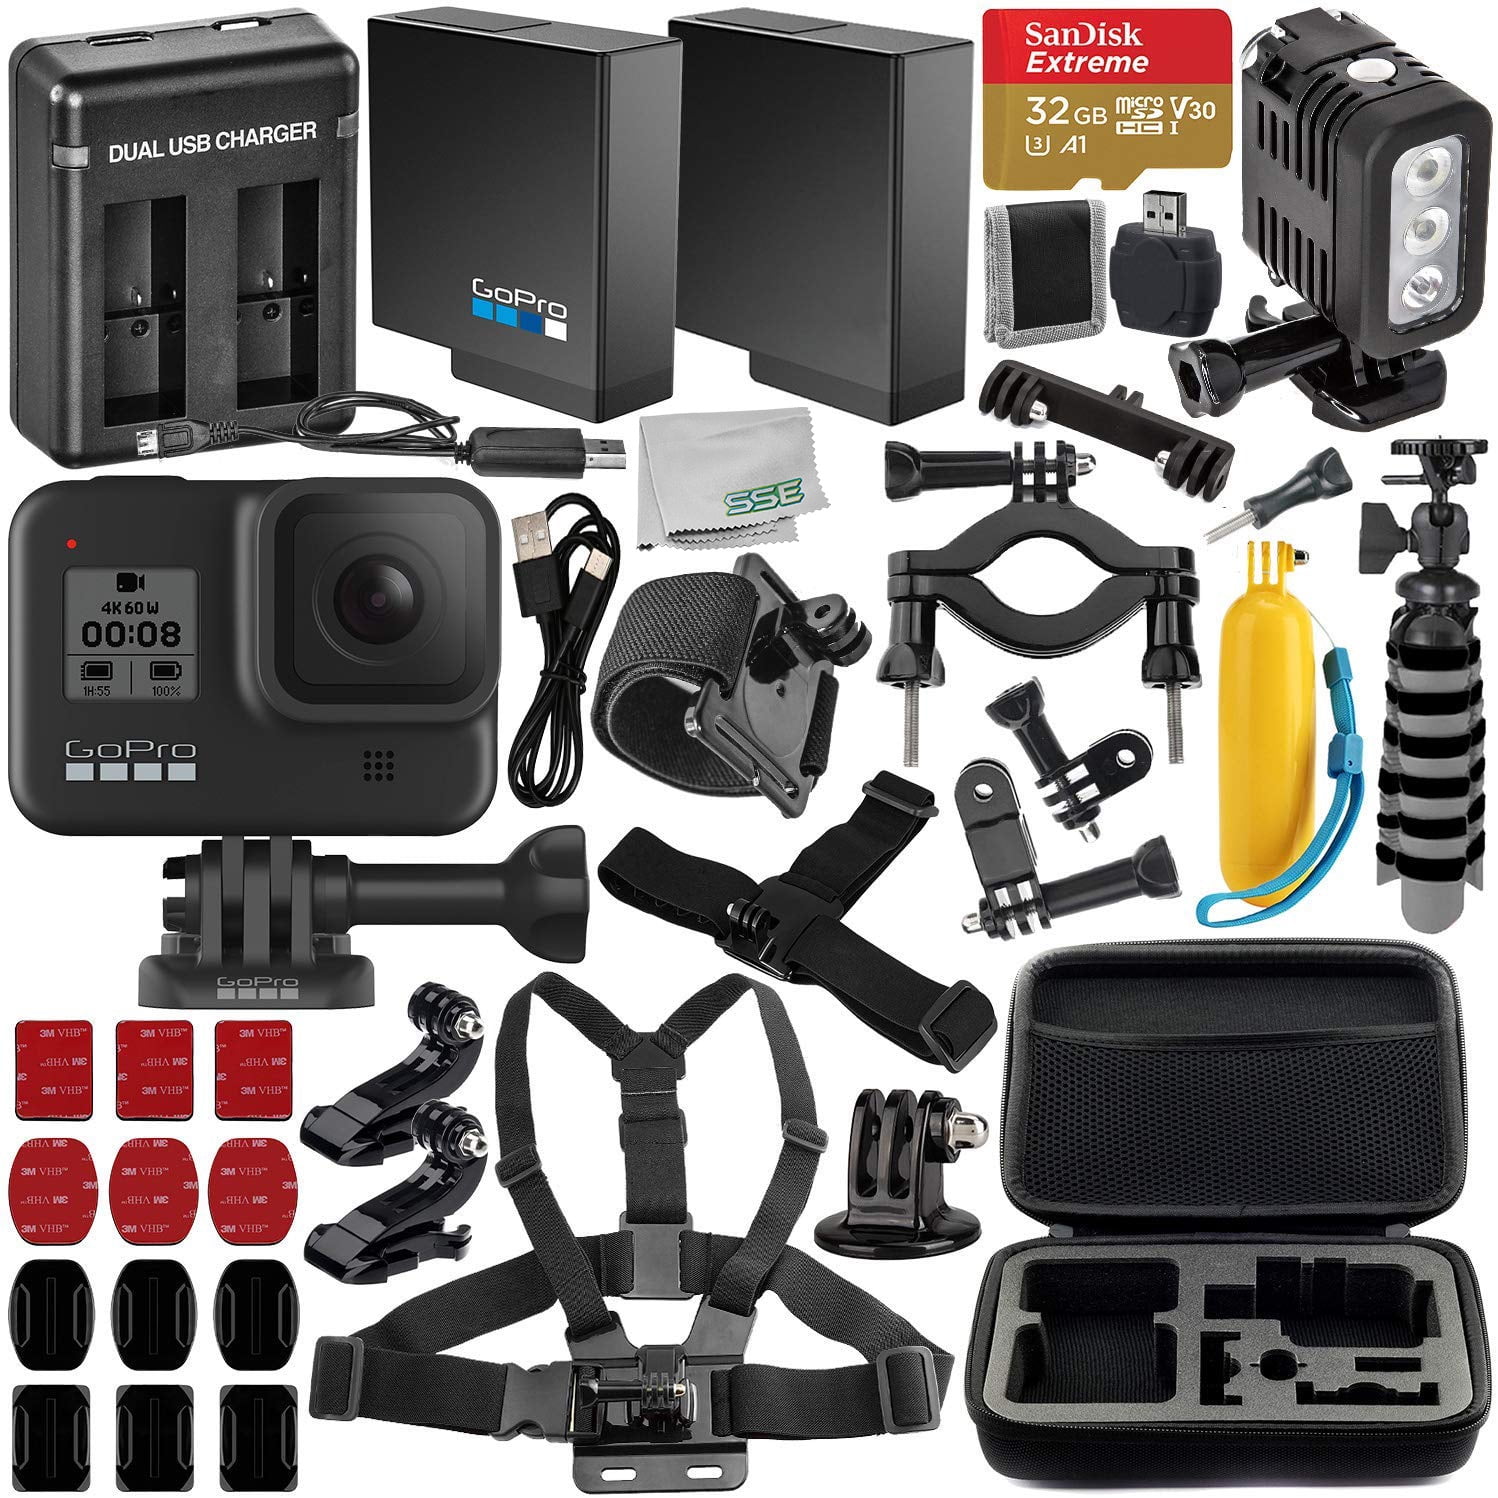 GoPro HERO8 Black with Deluxe Accessory Bundle Includes: SanDisk Extreme microSDHC Memory Card, Spare Battery, Dual Battery Charger, Underwater LED Light & MUCH MORE -